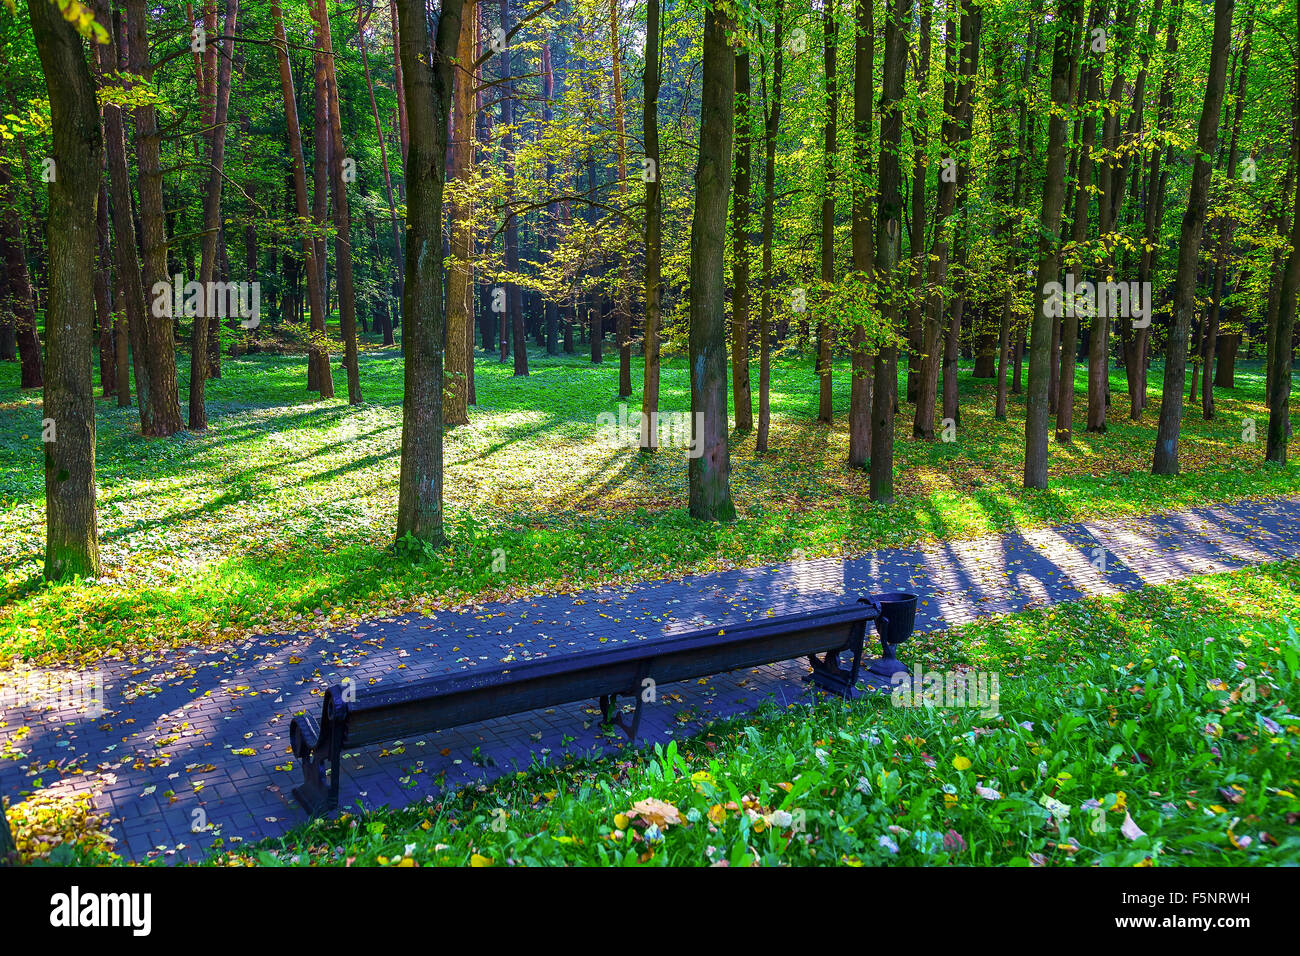 Bench along the Alley in Park at Sunny Day Stock Photo